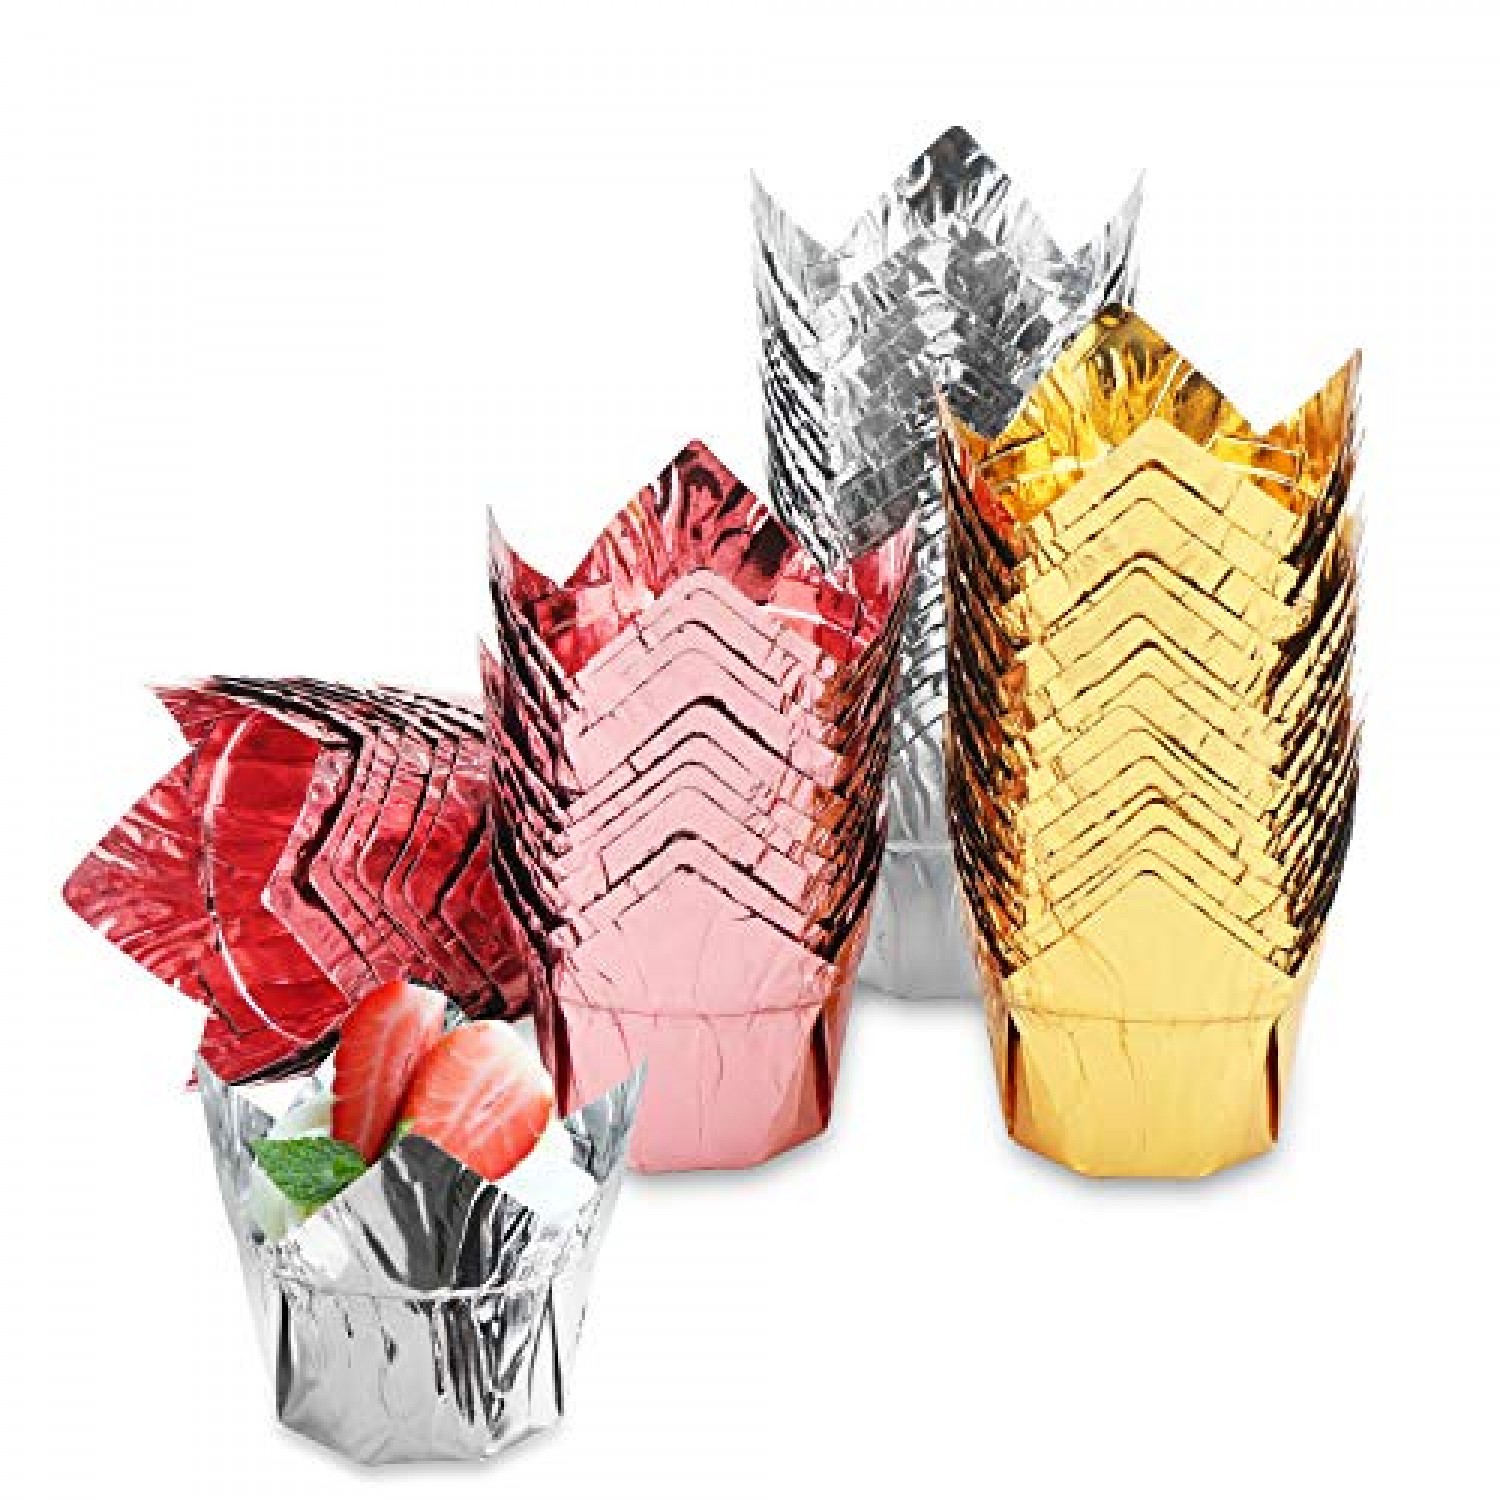 Gold Tulip Cupcake Liners, Foil Muffin Baking Cups (3.35 x 3.5 In, 100 –  Sparkle and Bash